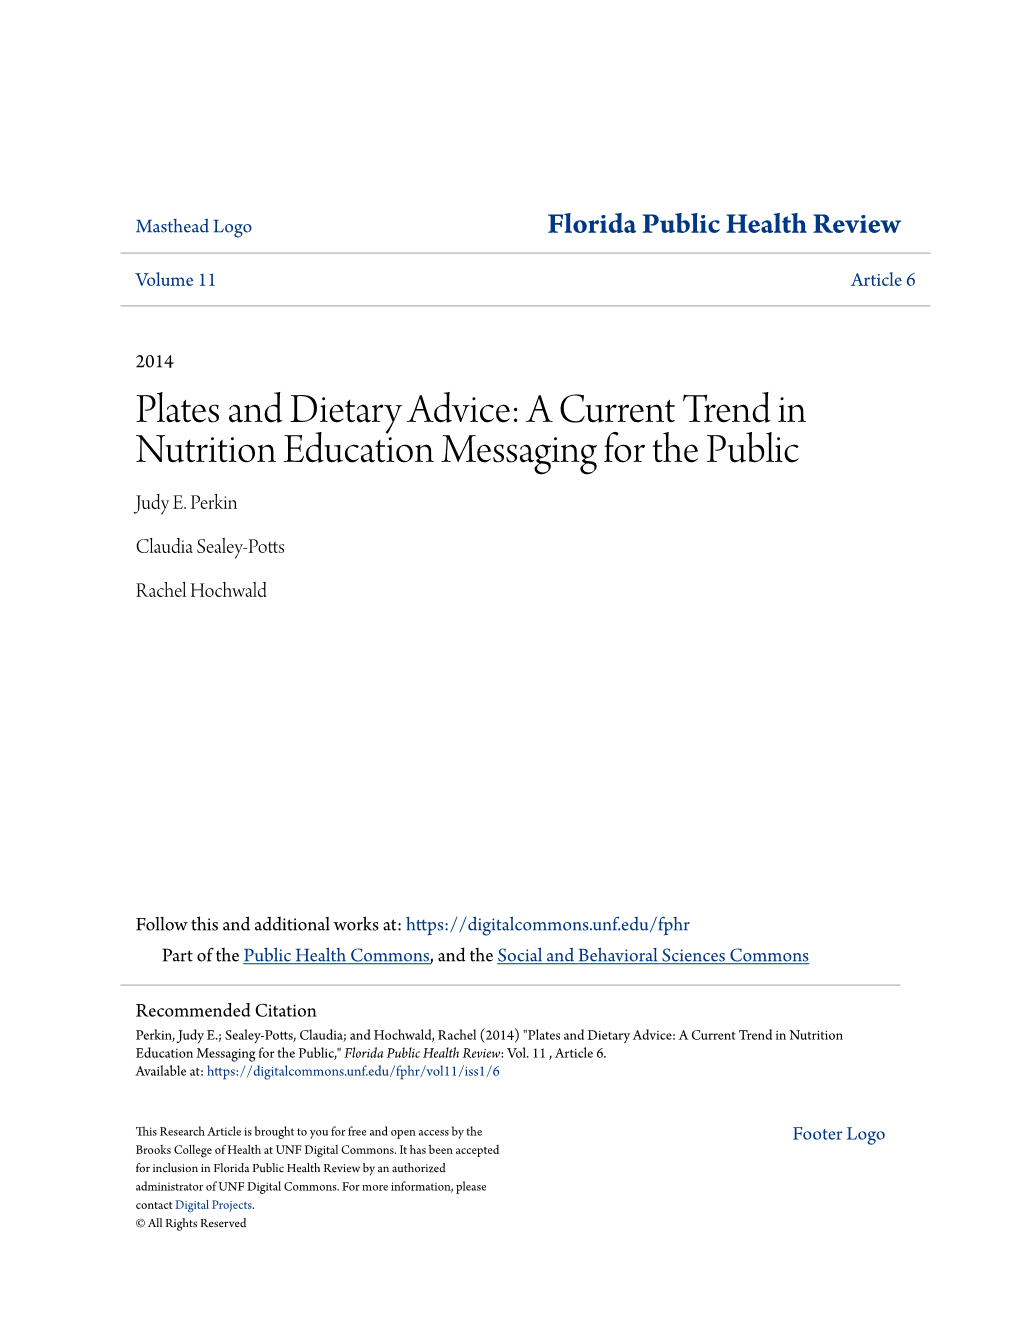 Plates and Dietary Advice: a Current Trend in Nutrition Education Messaging for the Public Judy E